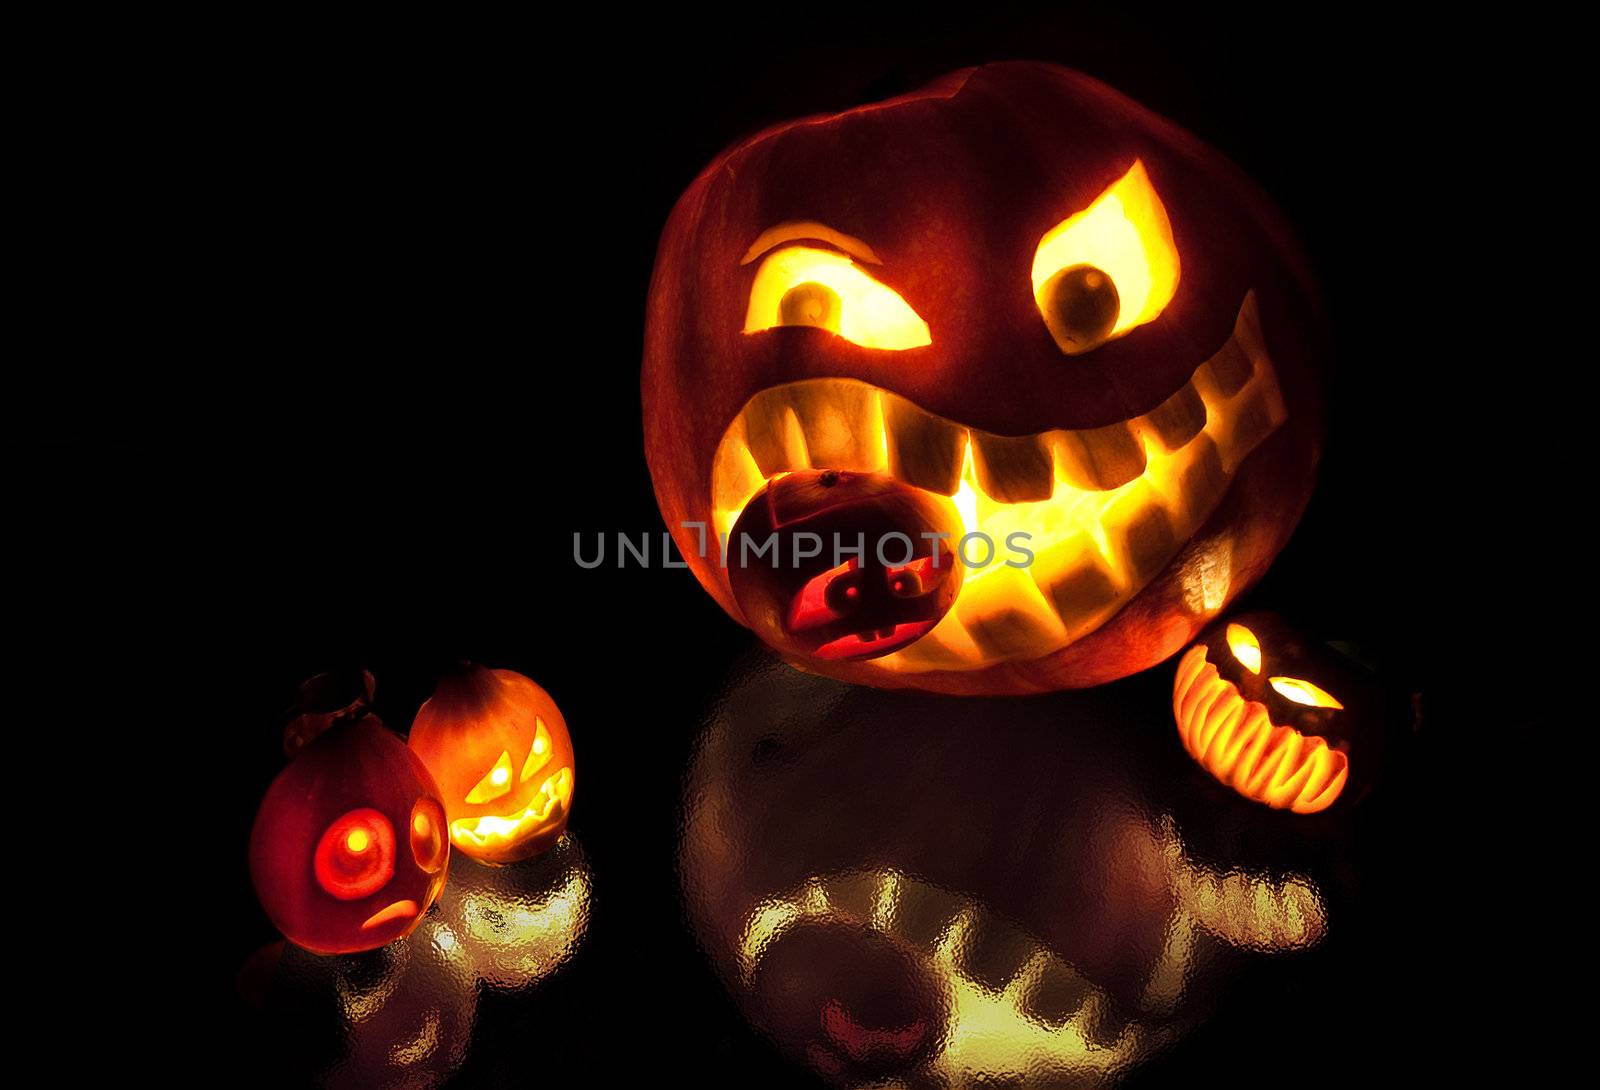 Pumpkins are very happy arrival of a new Halloween